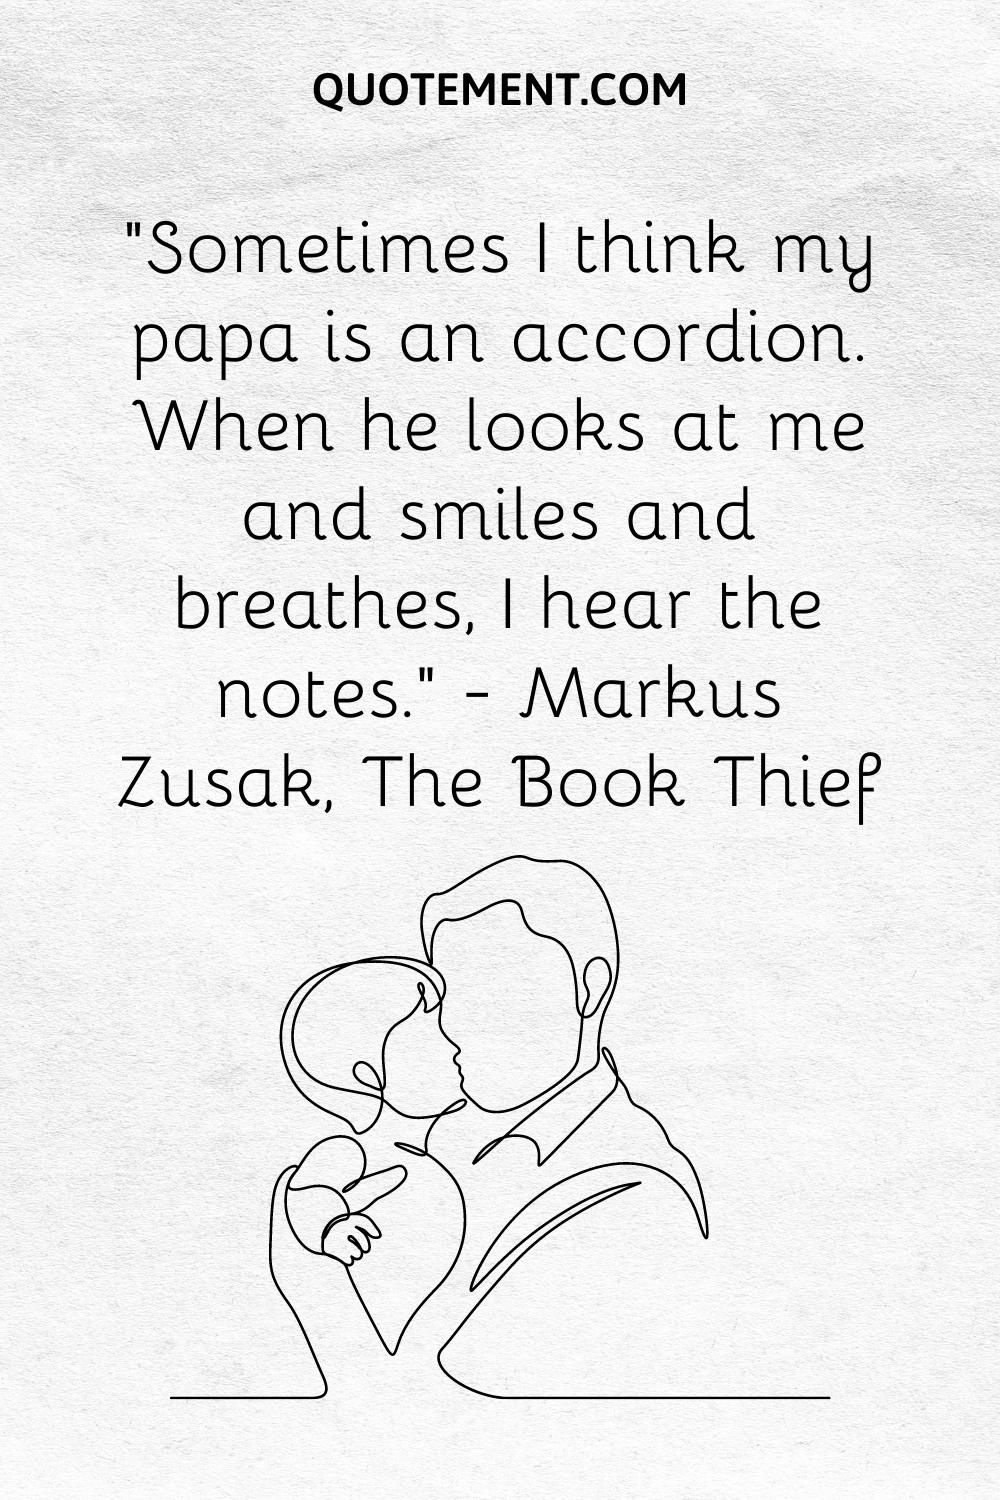 “Sometimes I think my papa is an accordion. When he looks at me and smiles and breathes, I hear the notes.” — Markus Zusak, The Book Thief